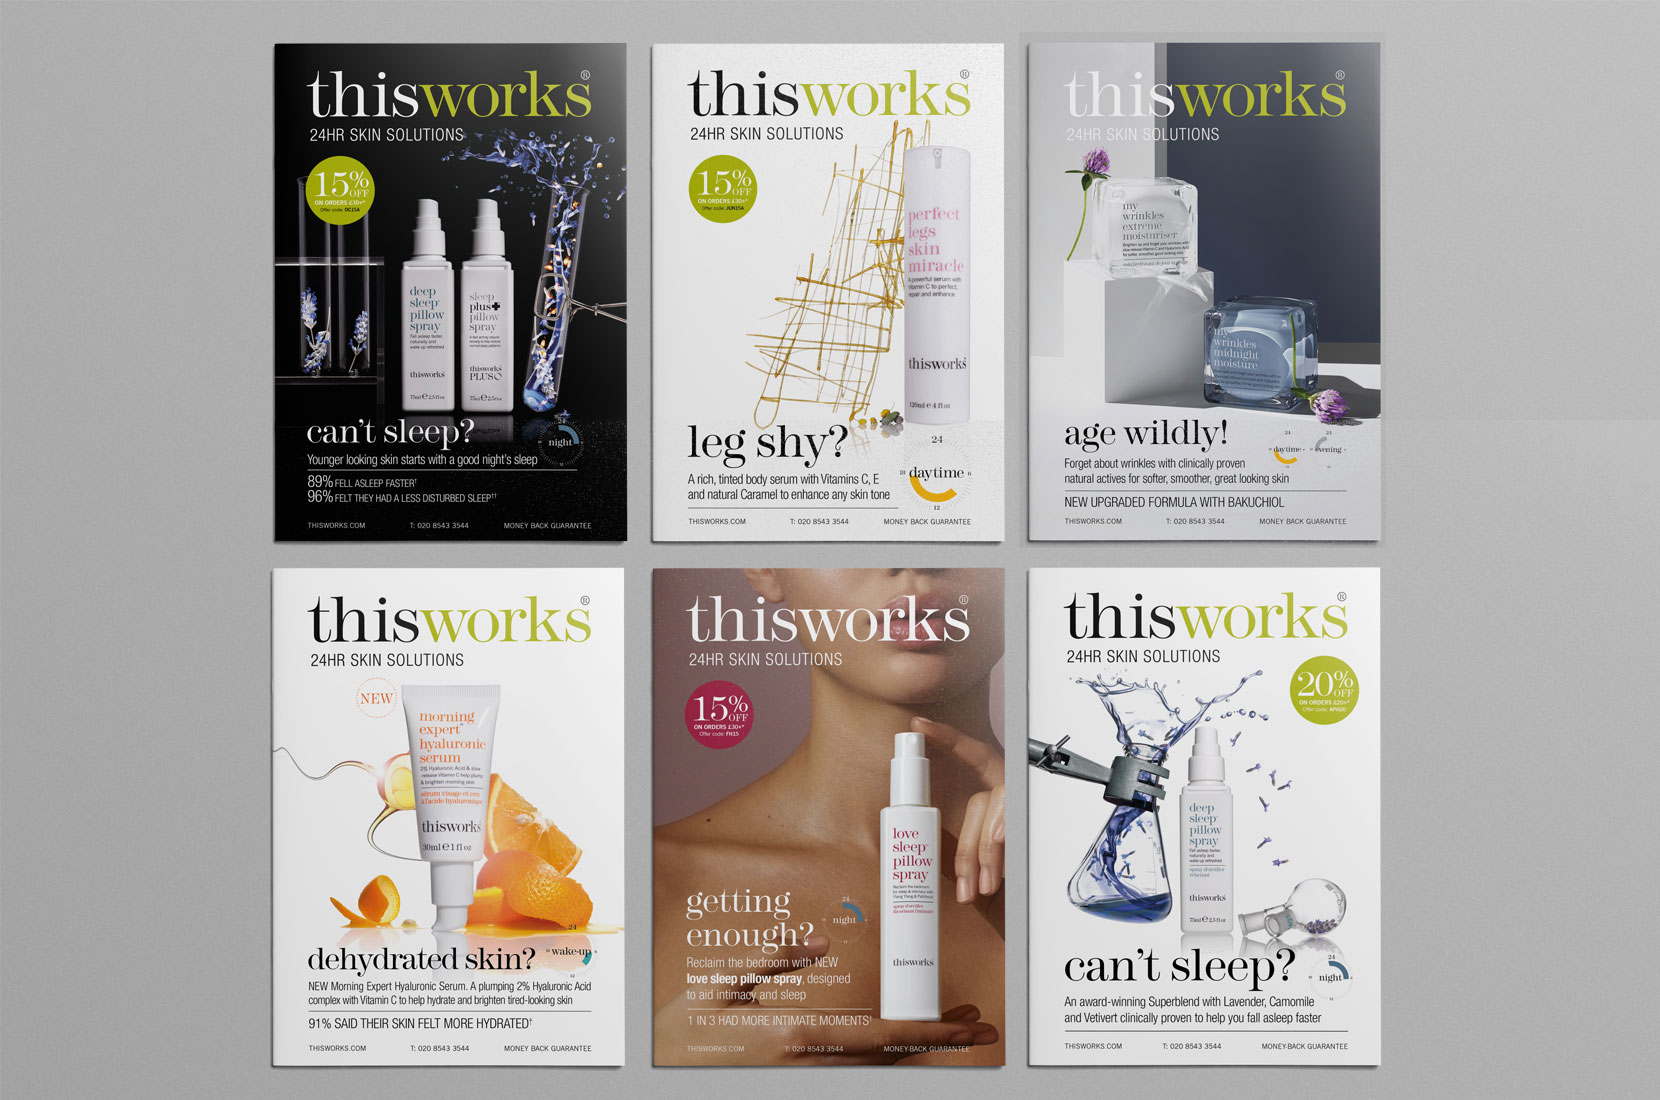 THISWORKS_Image_Large_cover2020